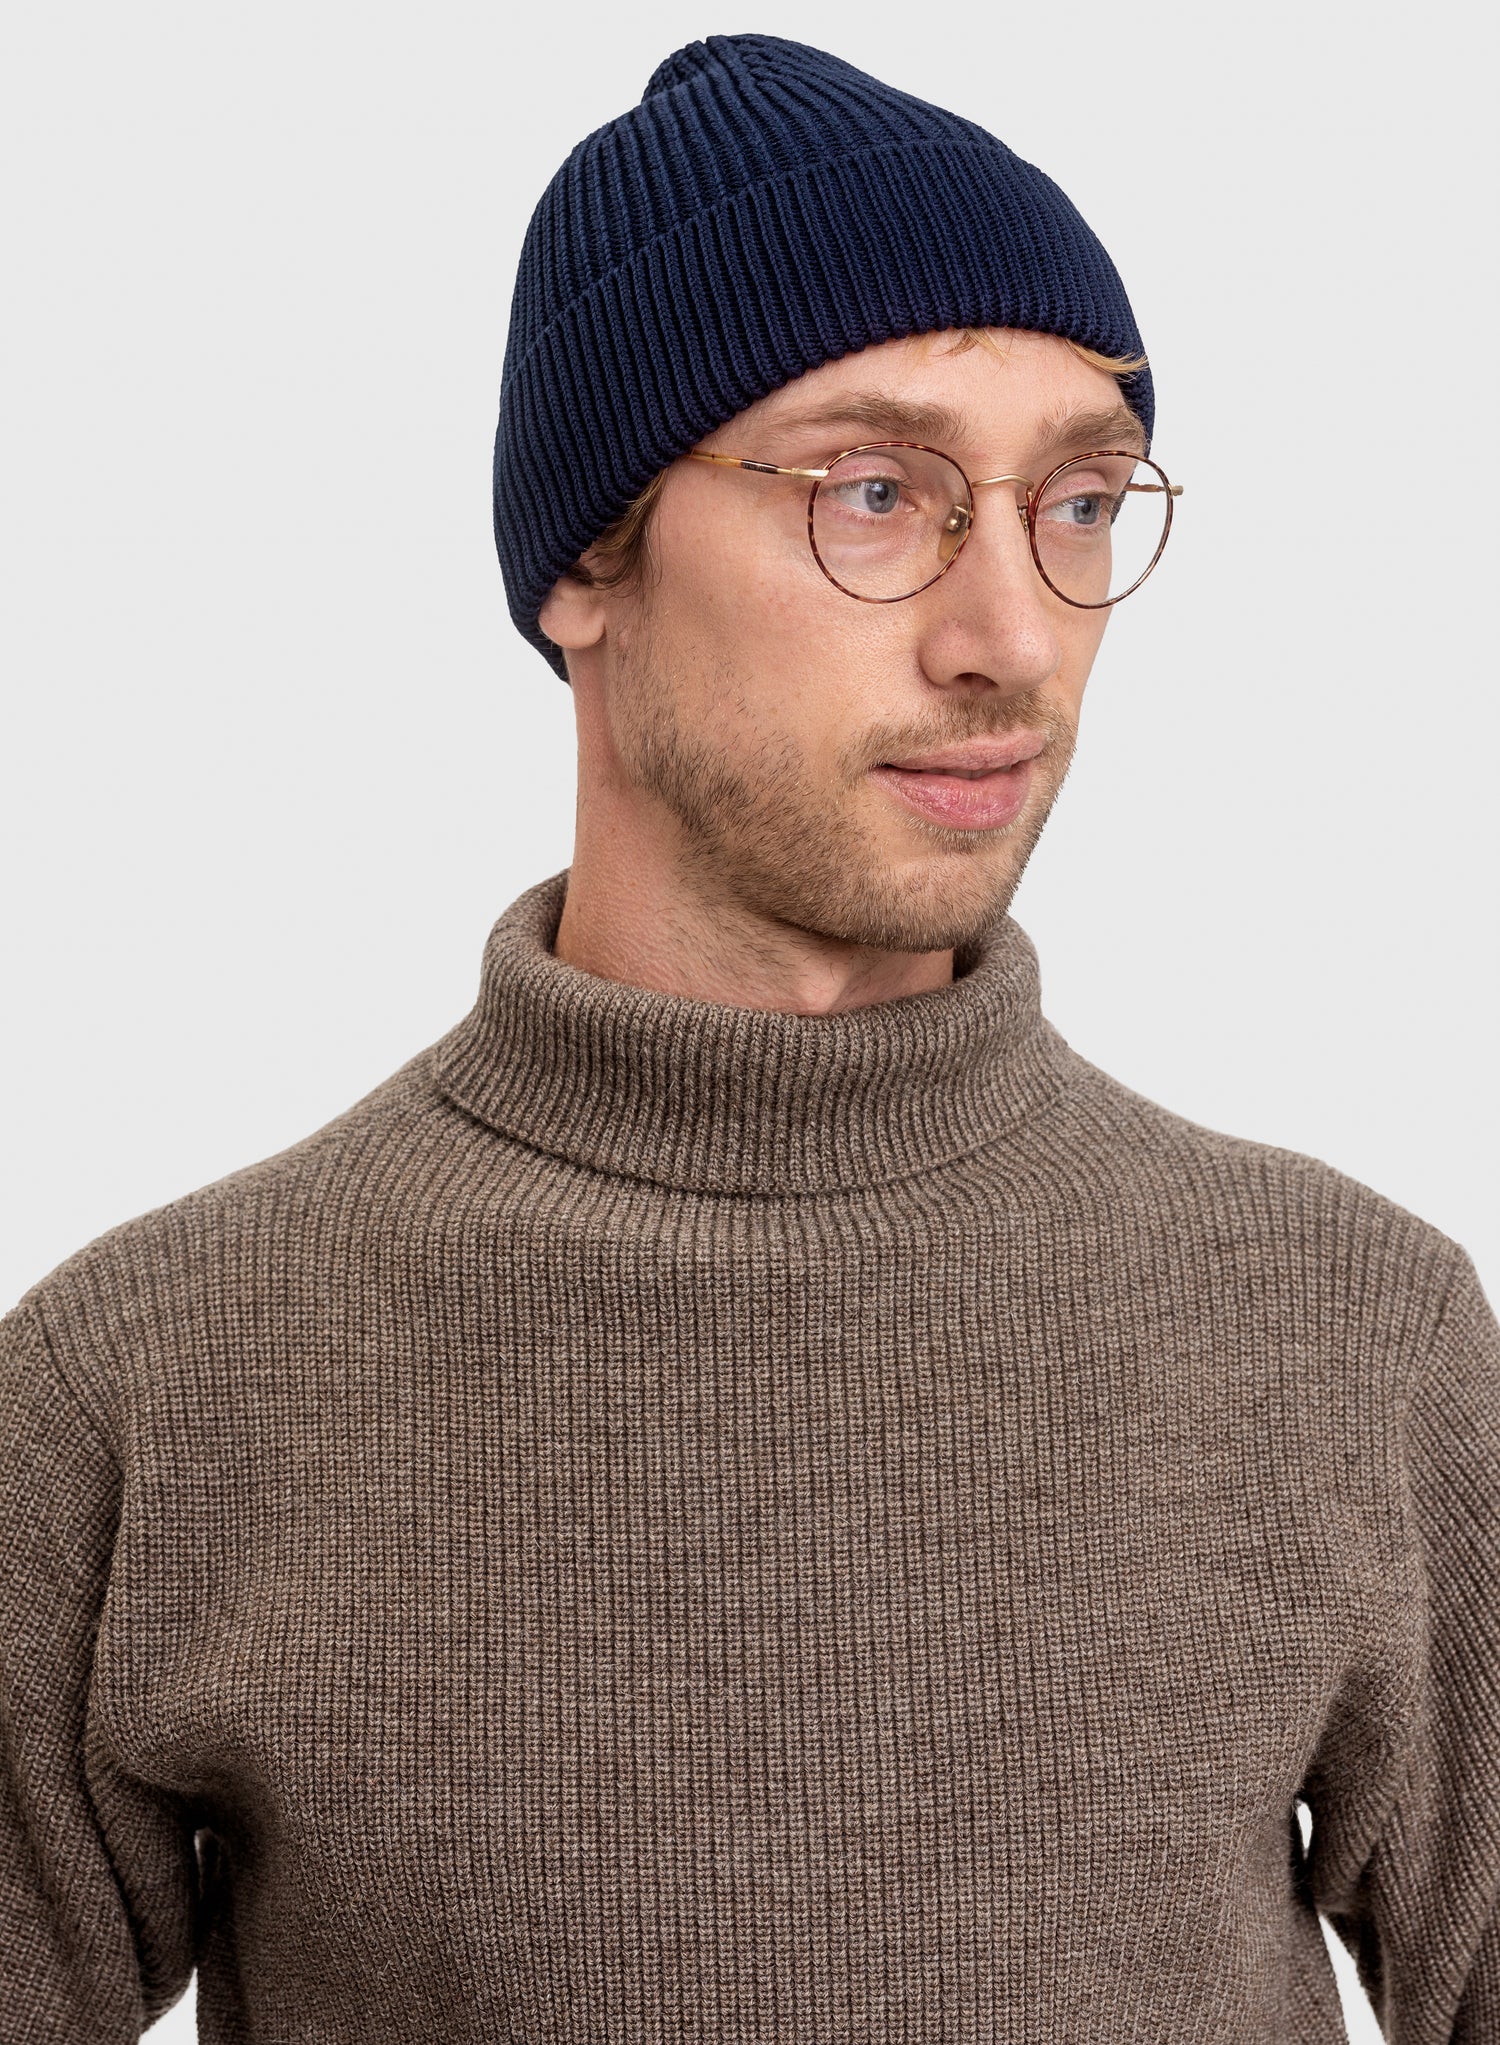 Jens Peter wearing Sailor Turtleneck in Natural Taupe and Medium Beanie in Royal Blue